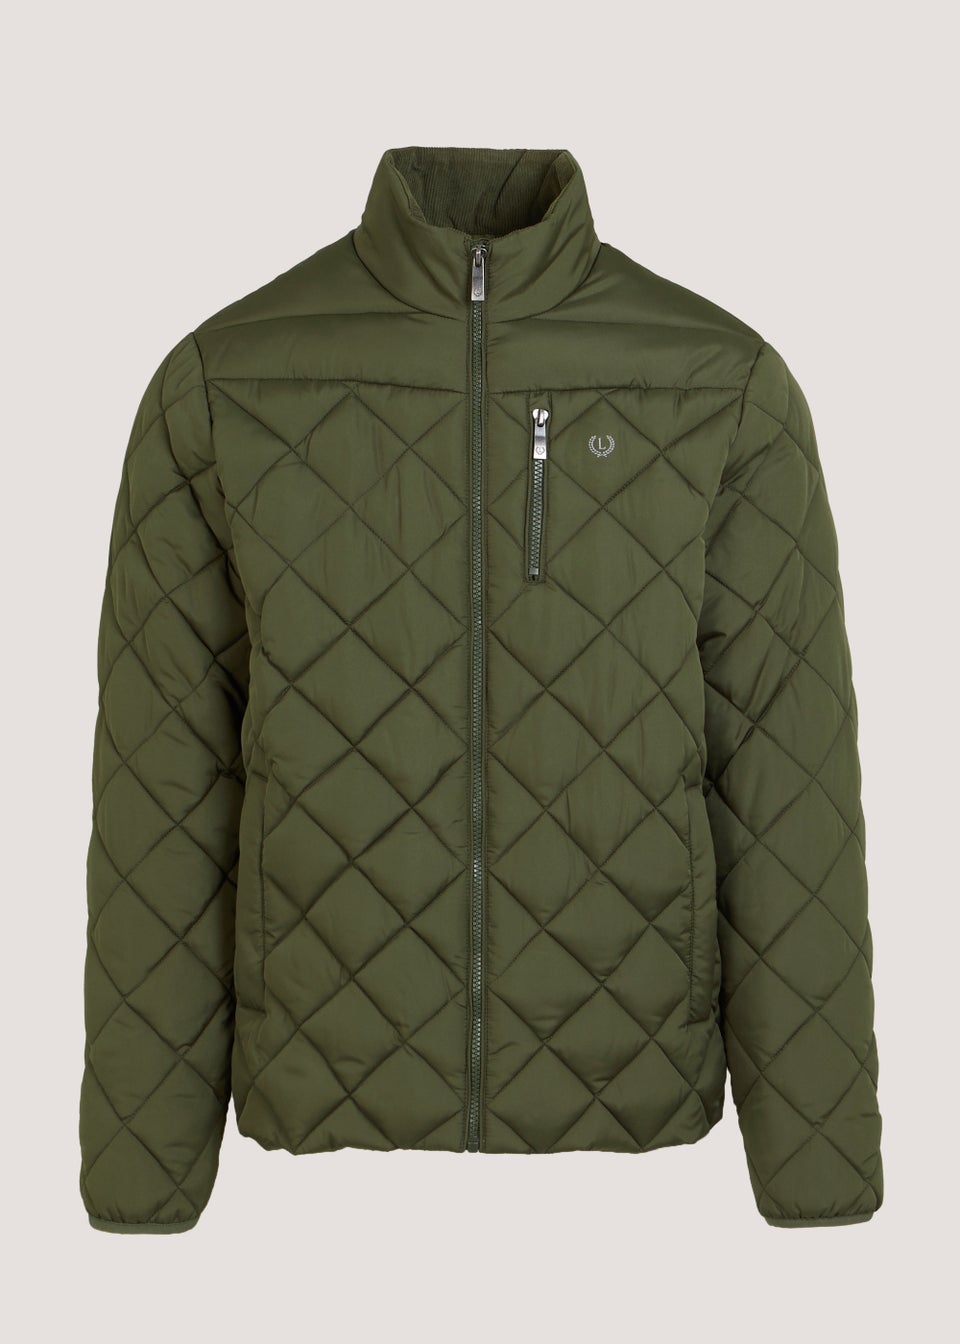 Lincoln Khaki Diamond Quilted Jacket